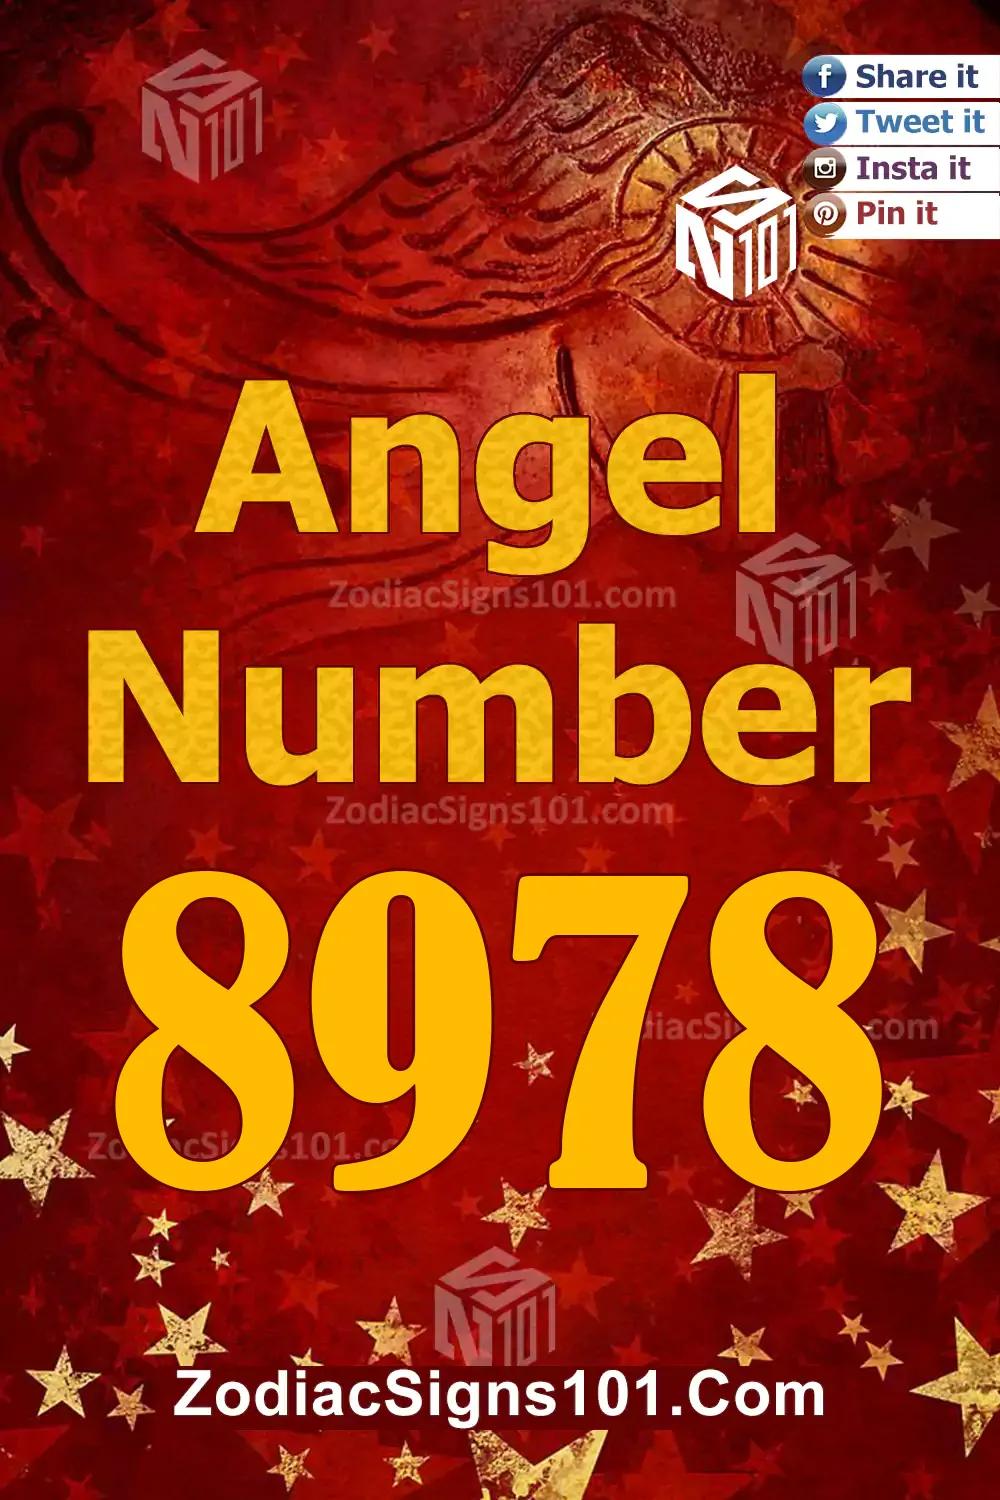 8978 Angel Number Meaning